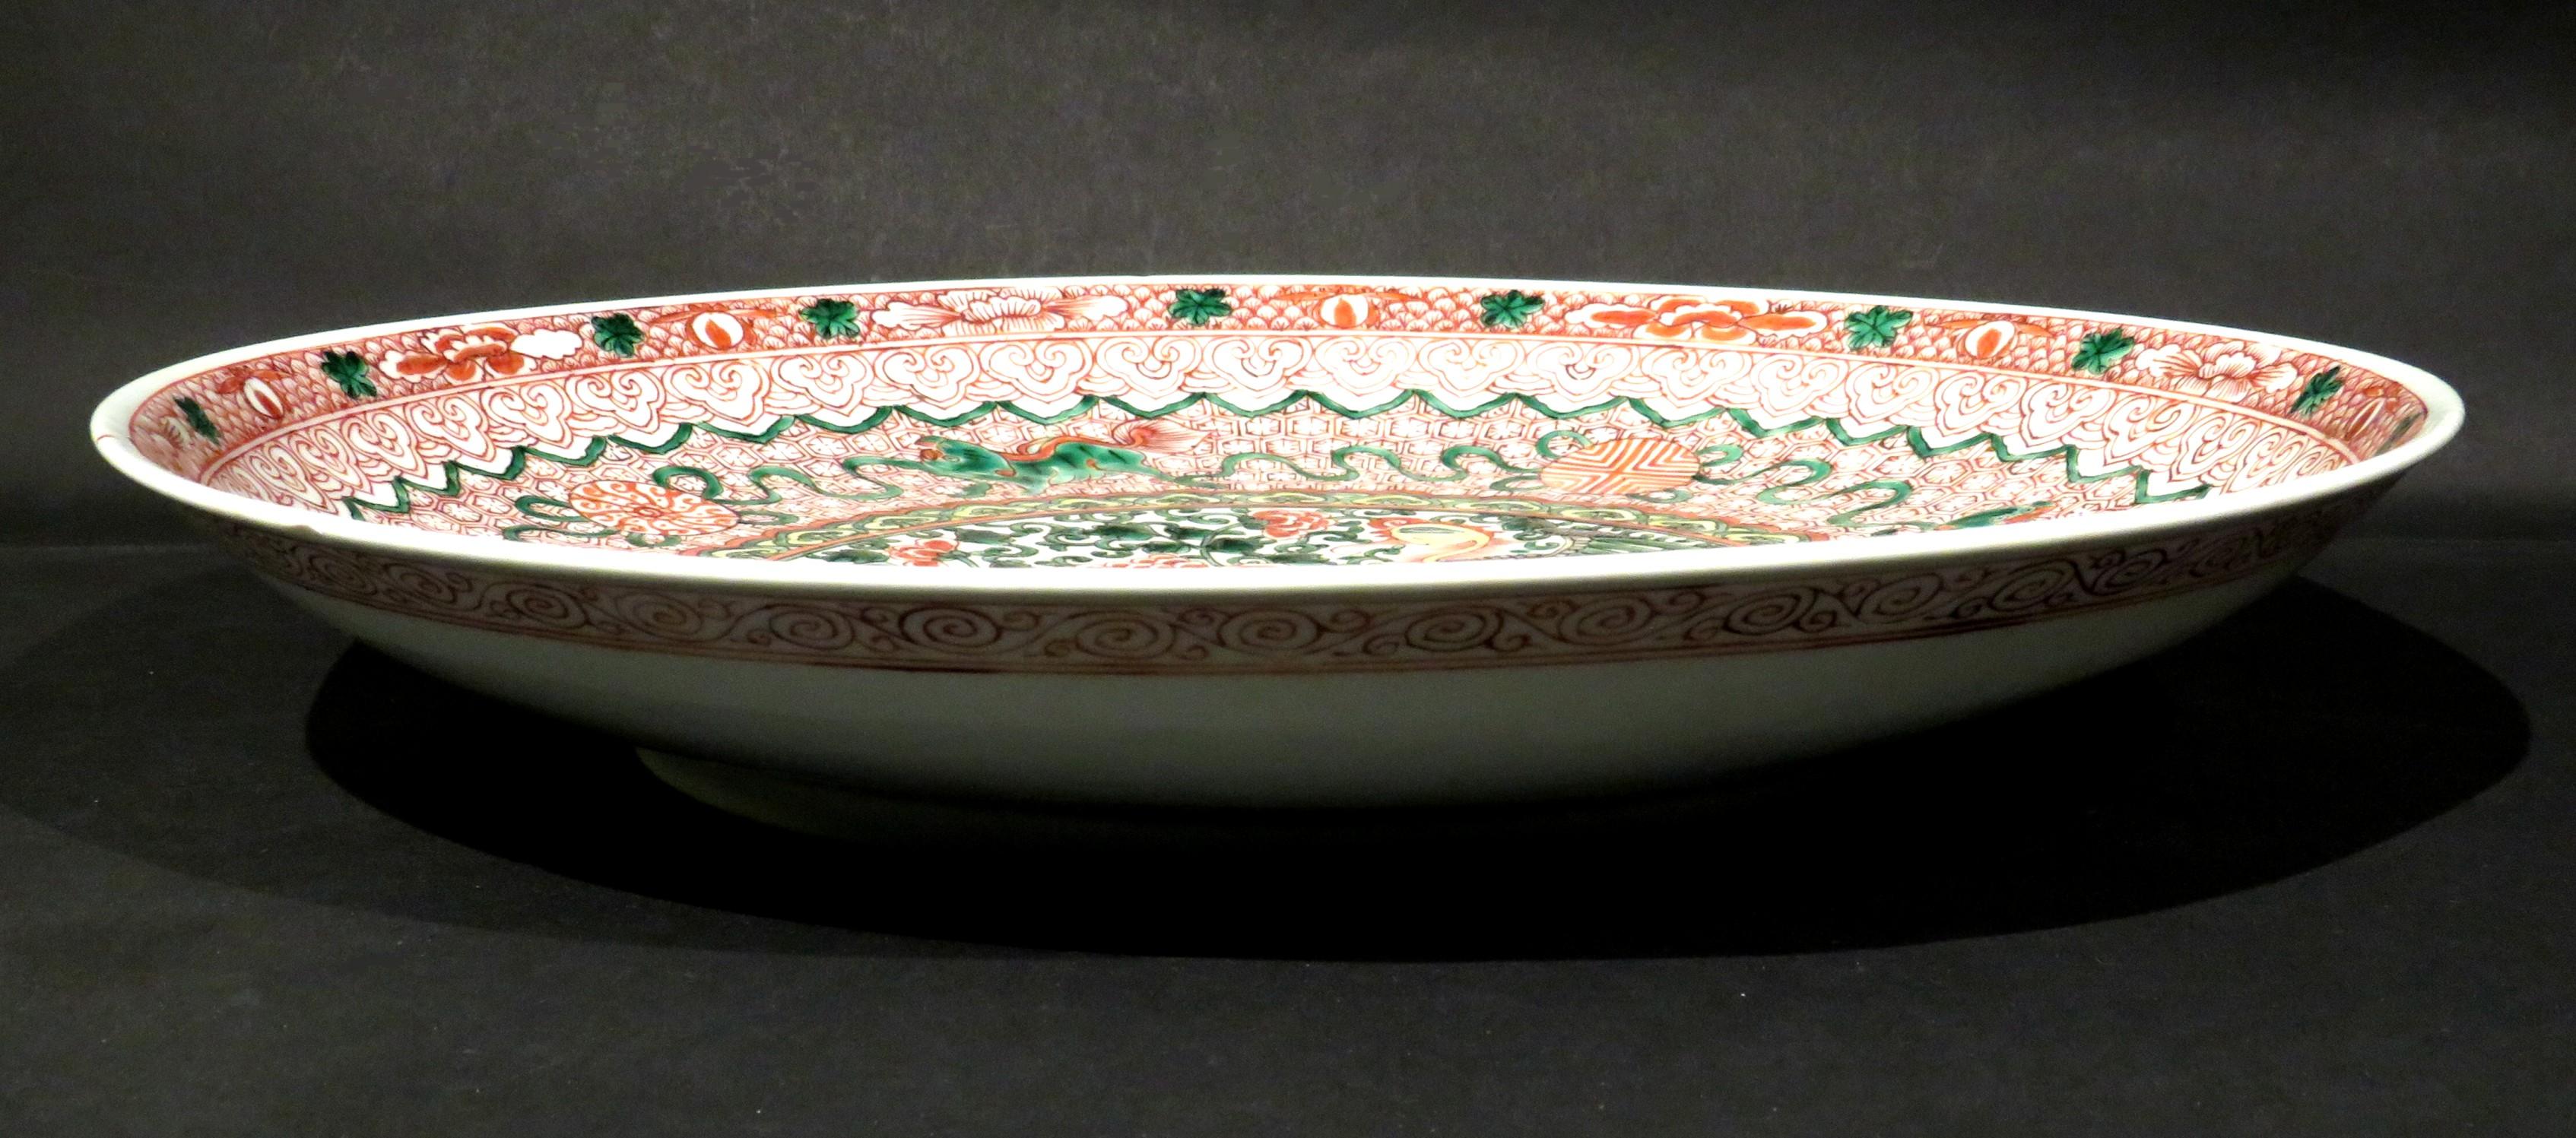 Late 17th Century A Chinese Famille Verte Enameled Porcelain Charger, Kangxi Period (1662-1722) For Sale